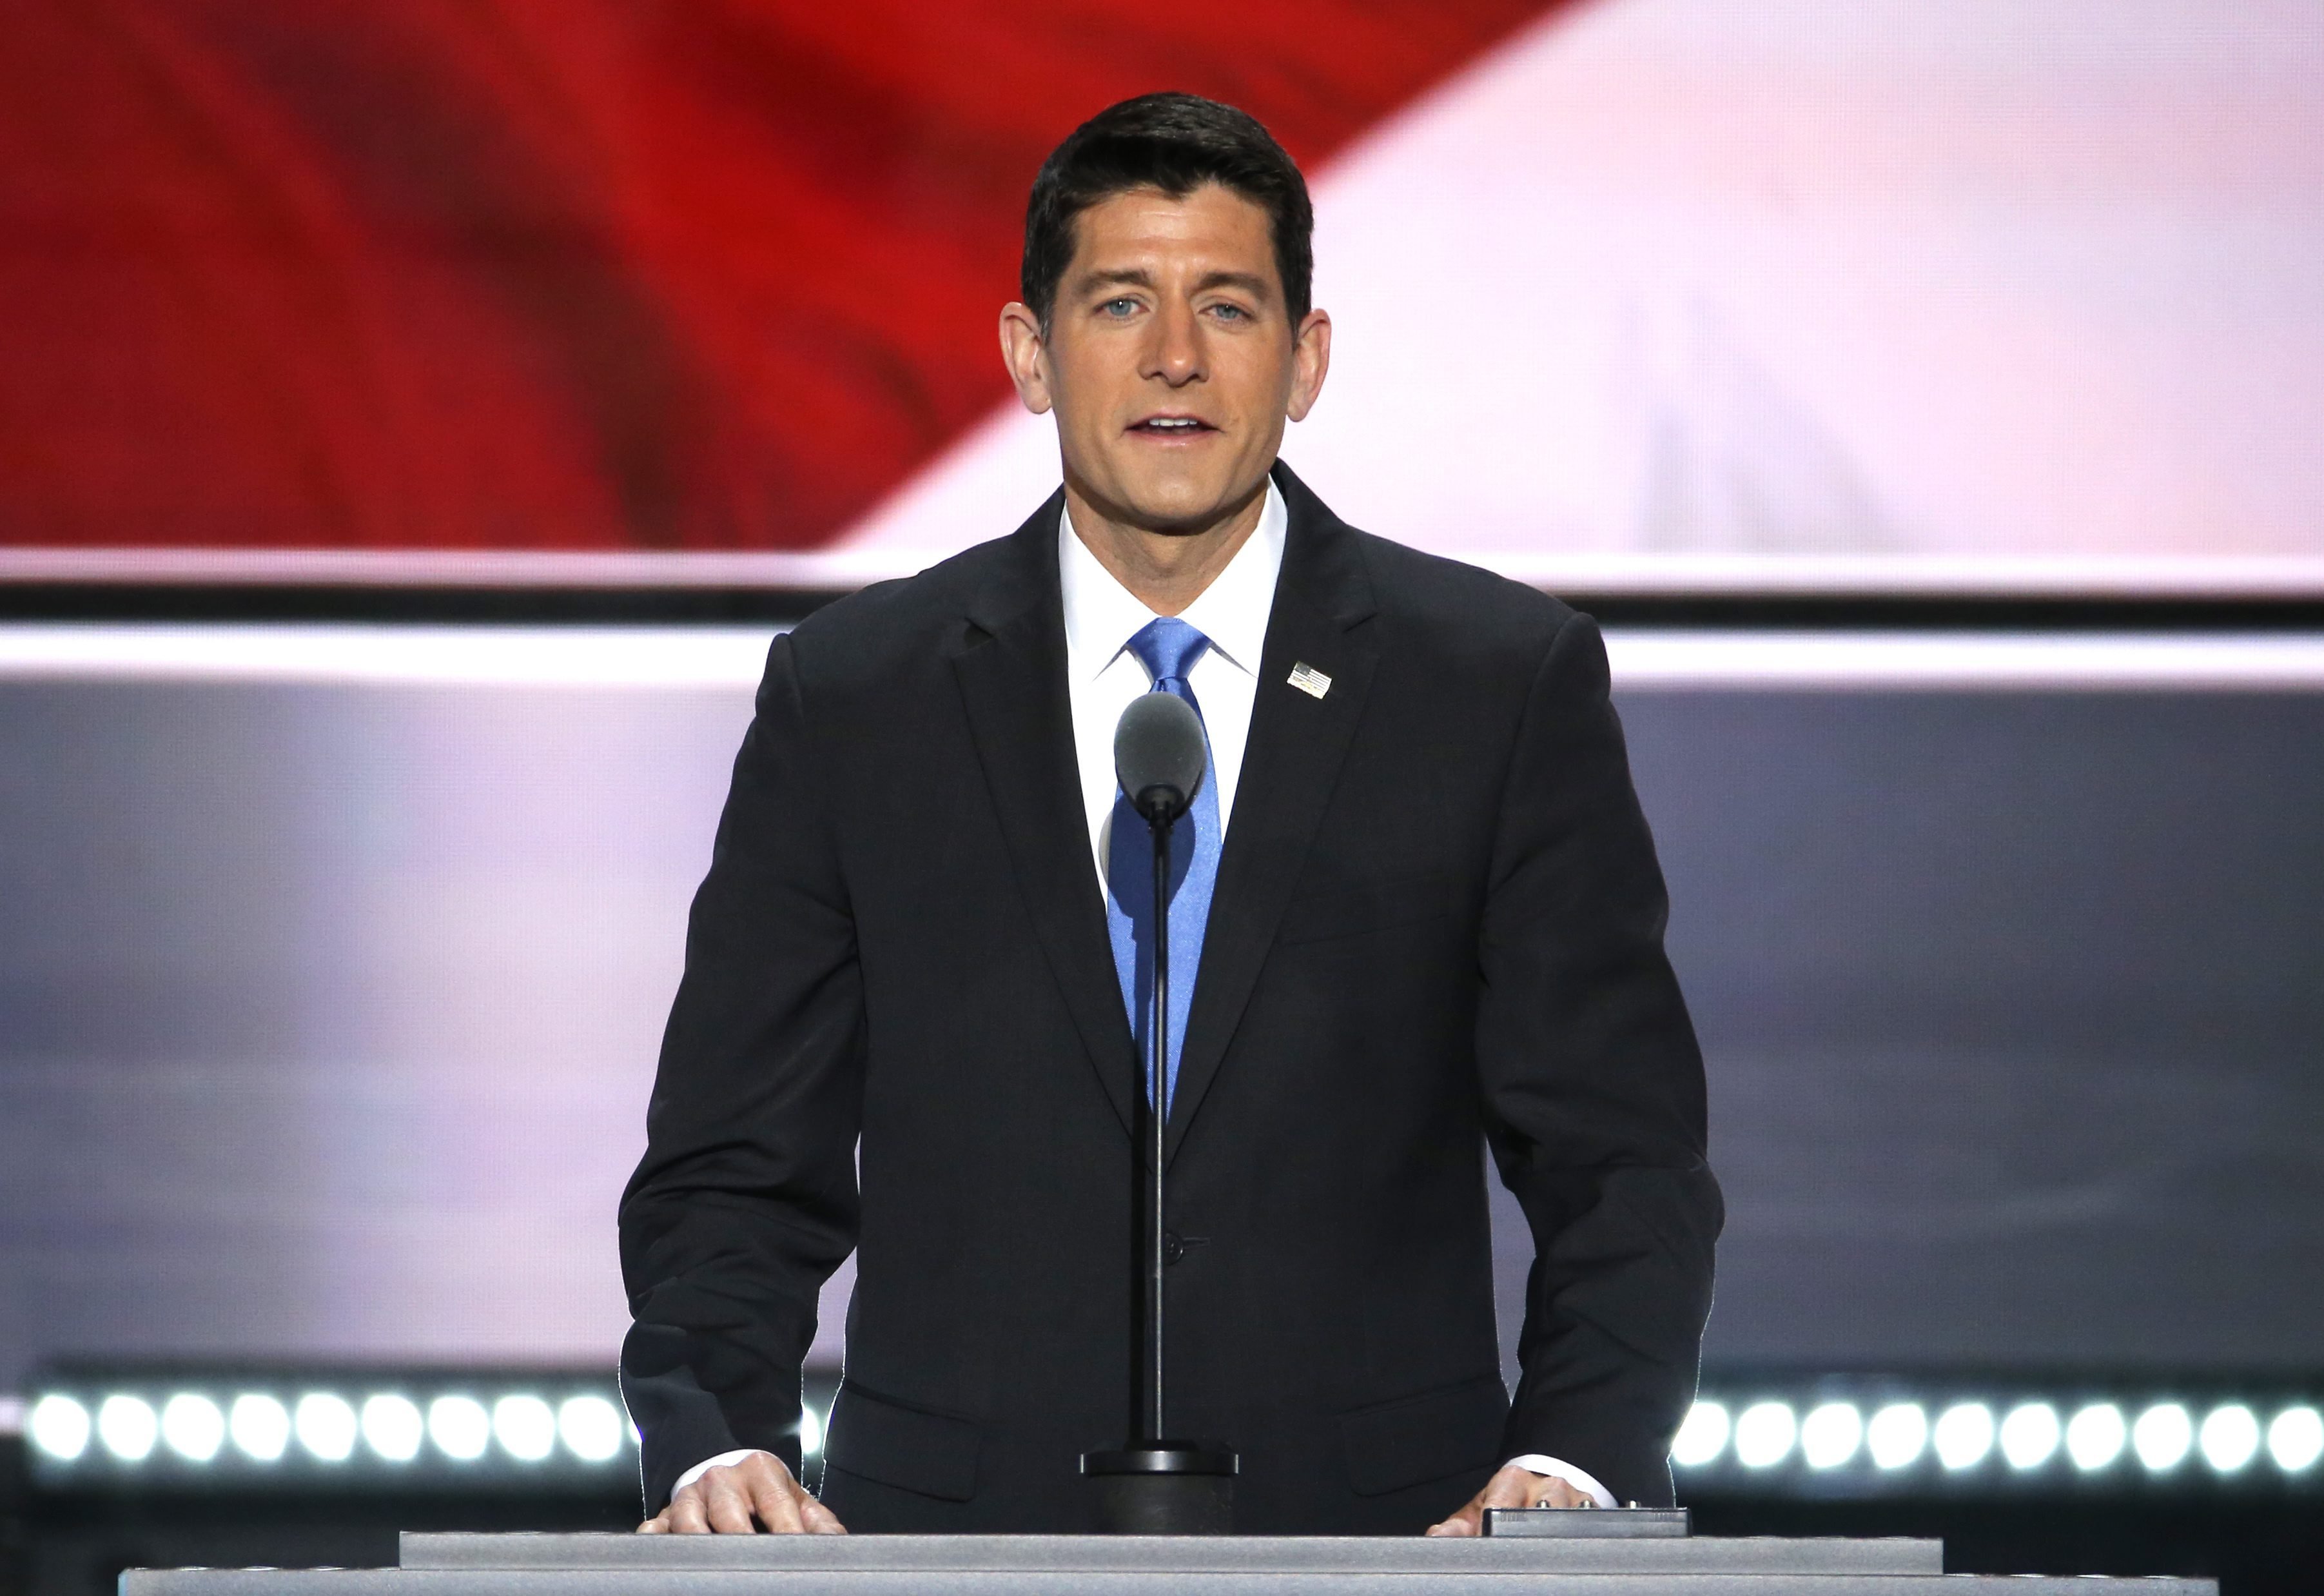 Speaker of the House and Permanent Chair of the Republican National Convention Paul Ryan delivers remarks on stage at the Quicken Loans Arena on the second day of the 2016 Republican National Convention in Cleveland, July 19, 2016. (Shawn Thew—EPA)